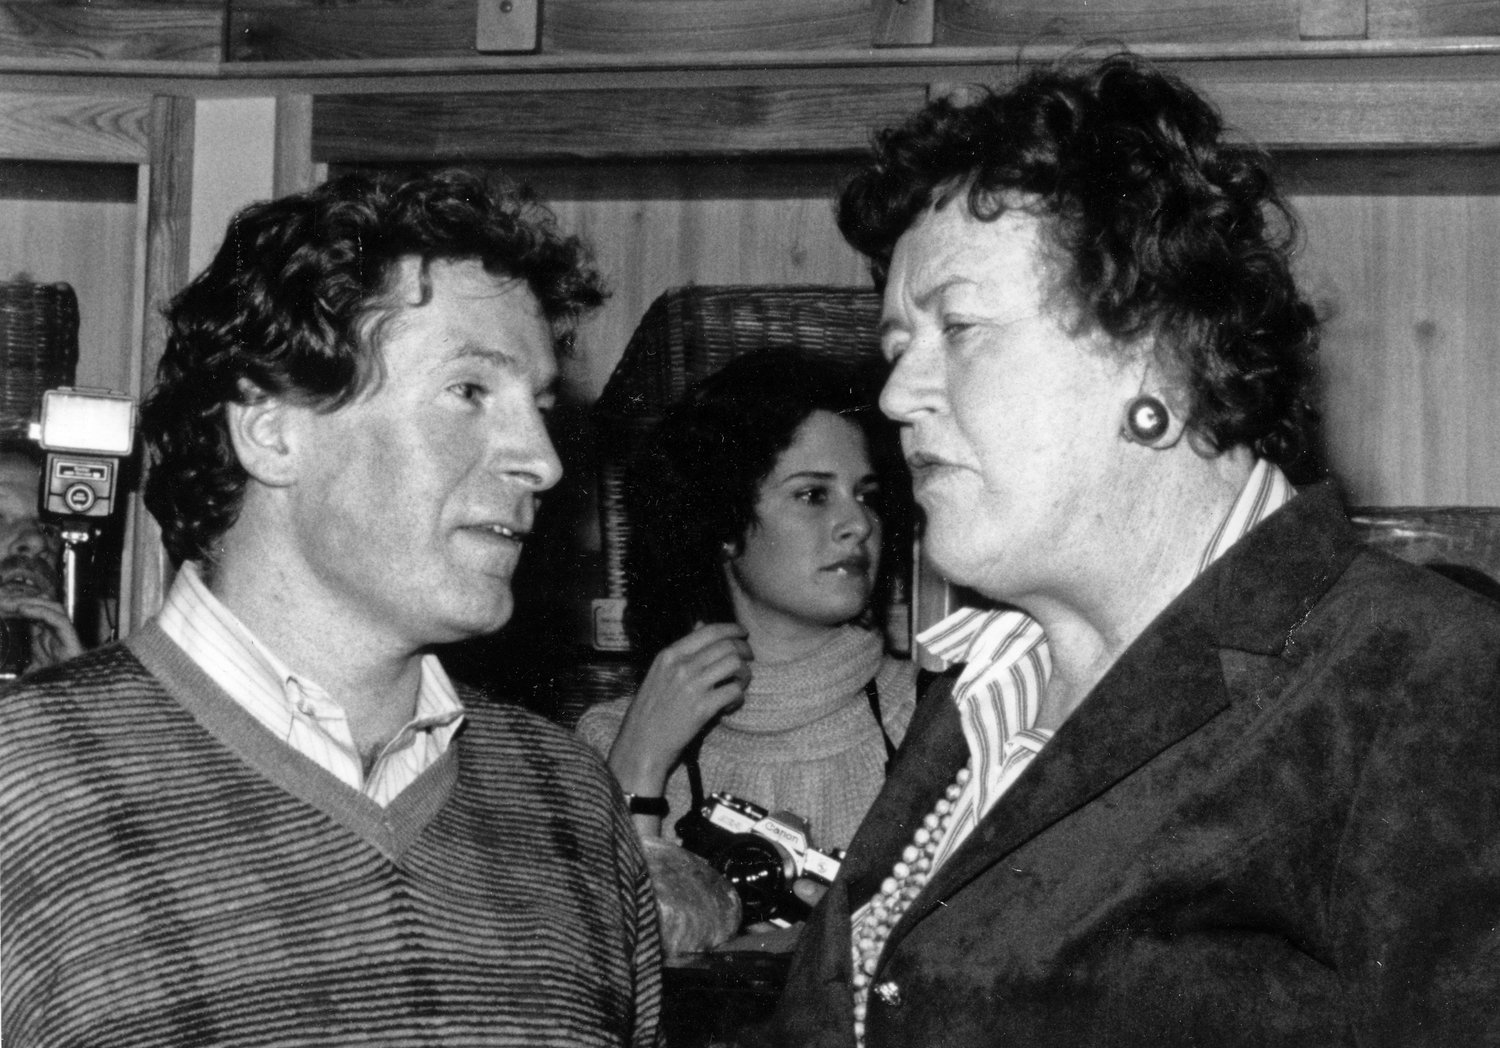 Jeremiah Tower with Julia Child at her birthday party in the early 1980s